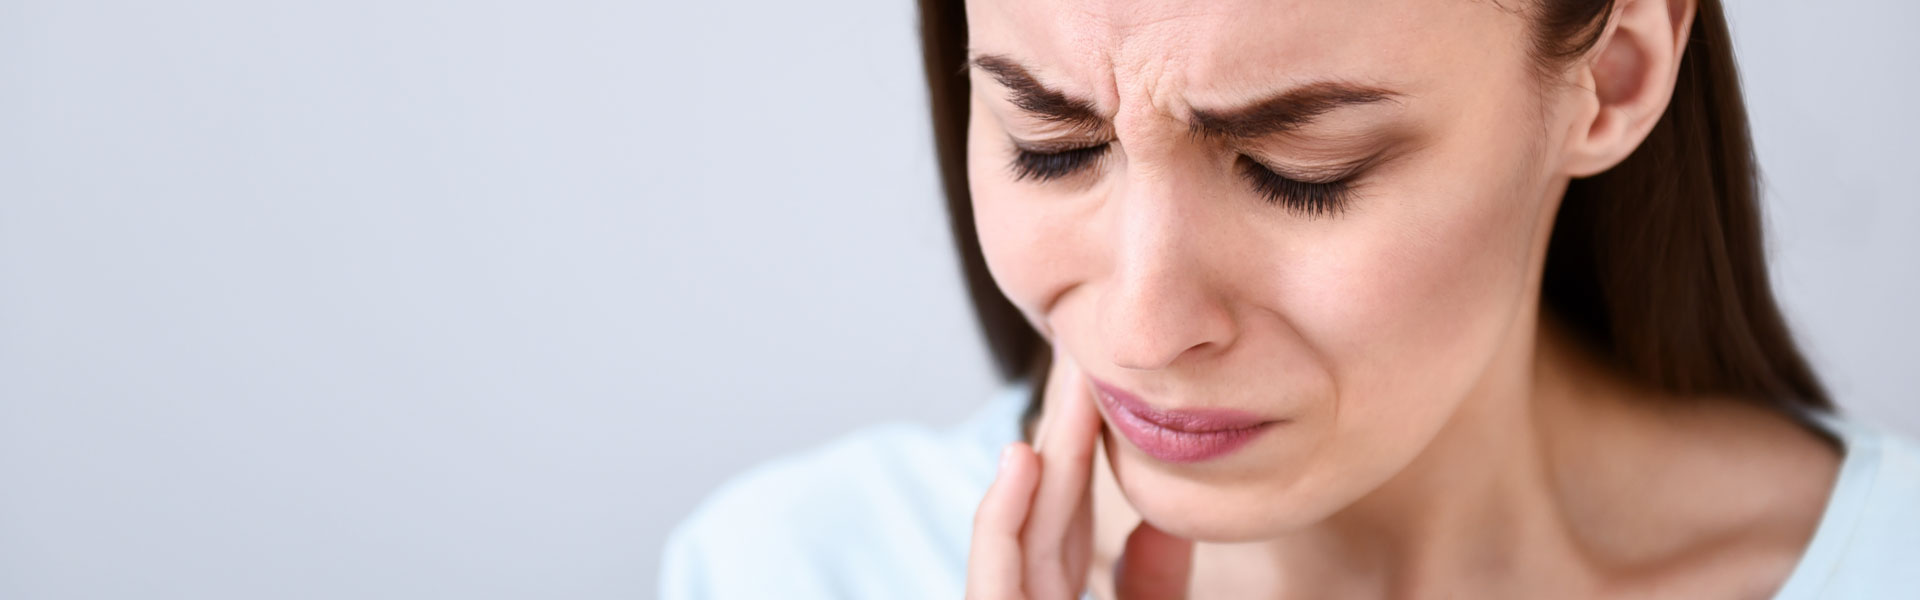 Woman suffering from toothache